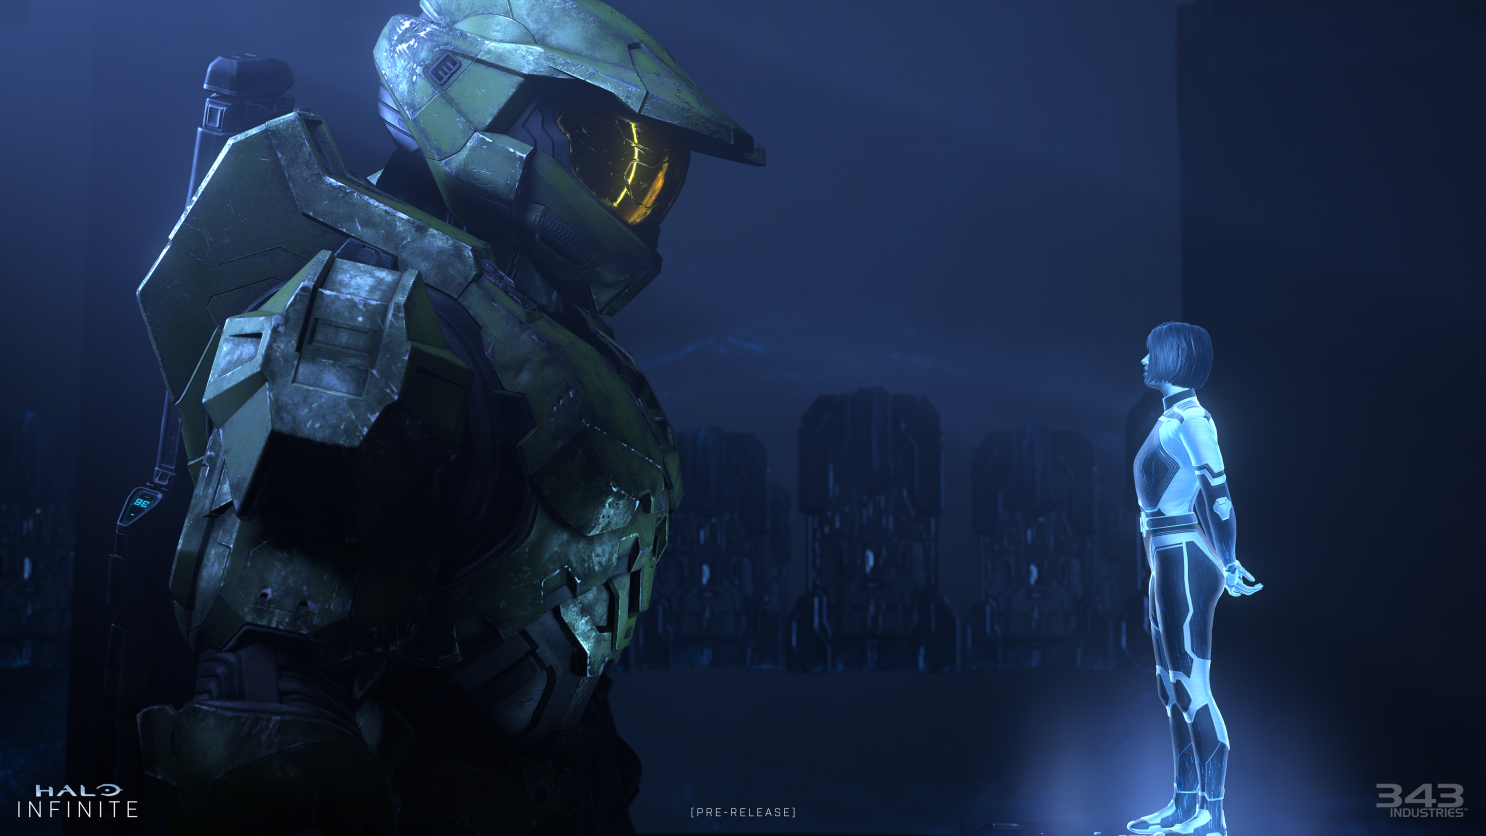 Halo Infinite Shows Why Battle Passes Need to Go Away